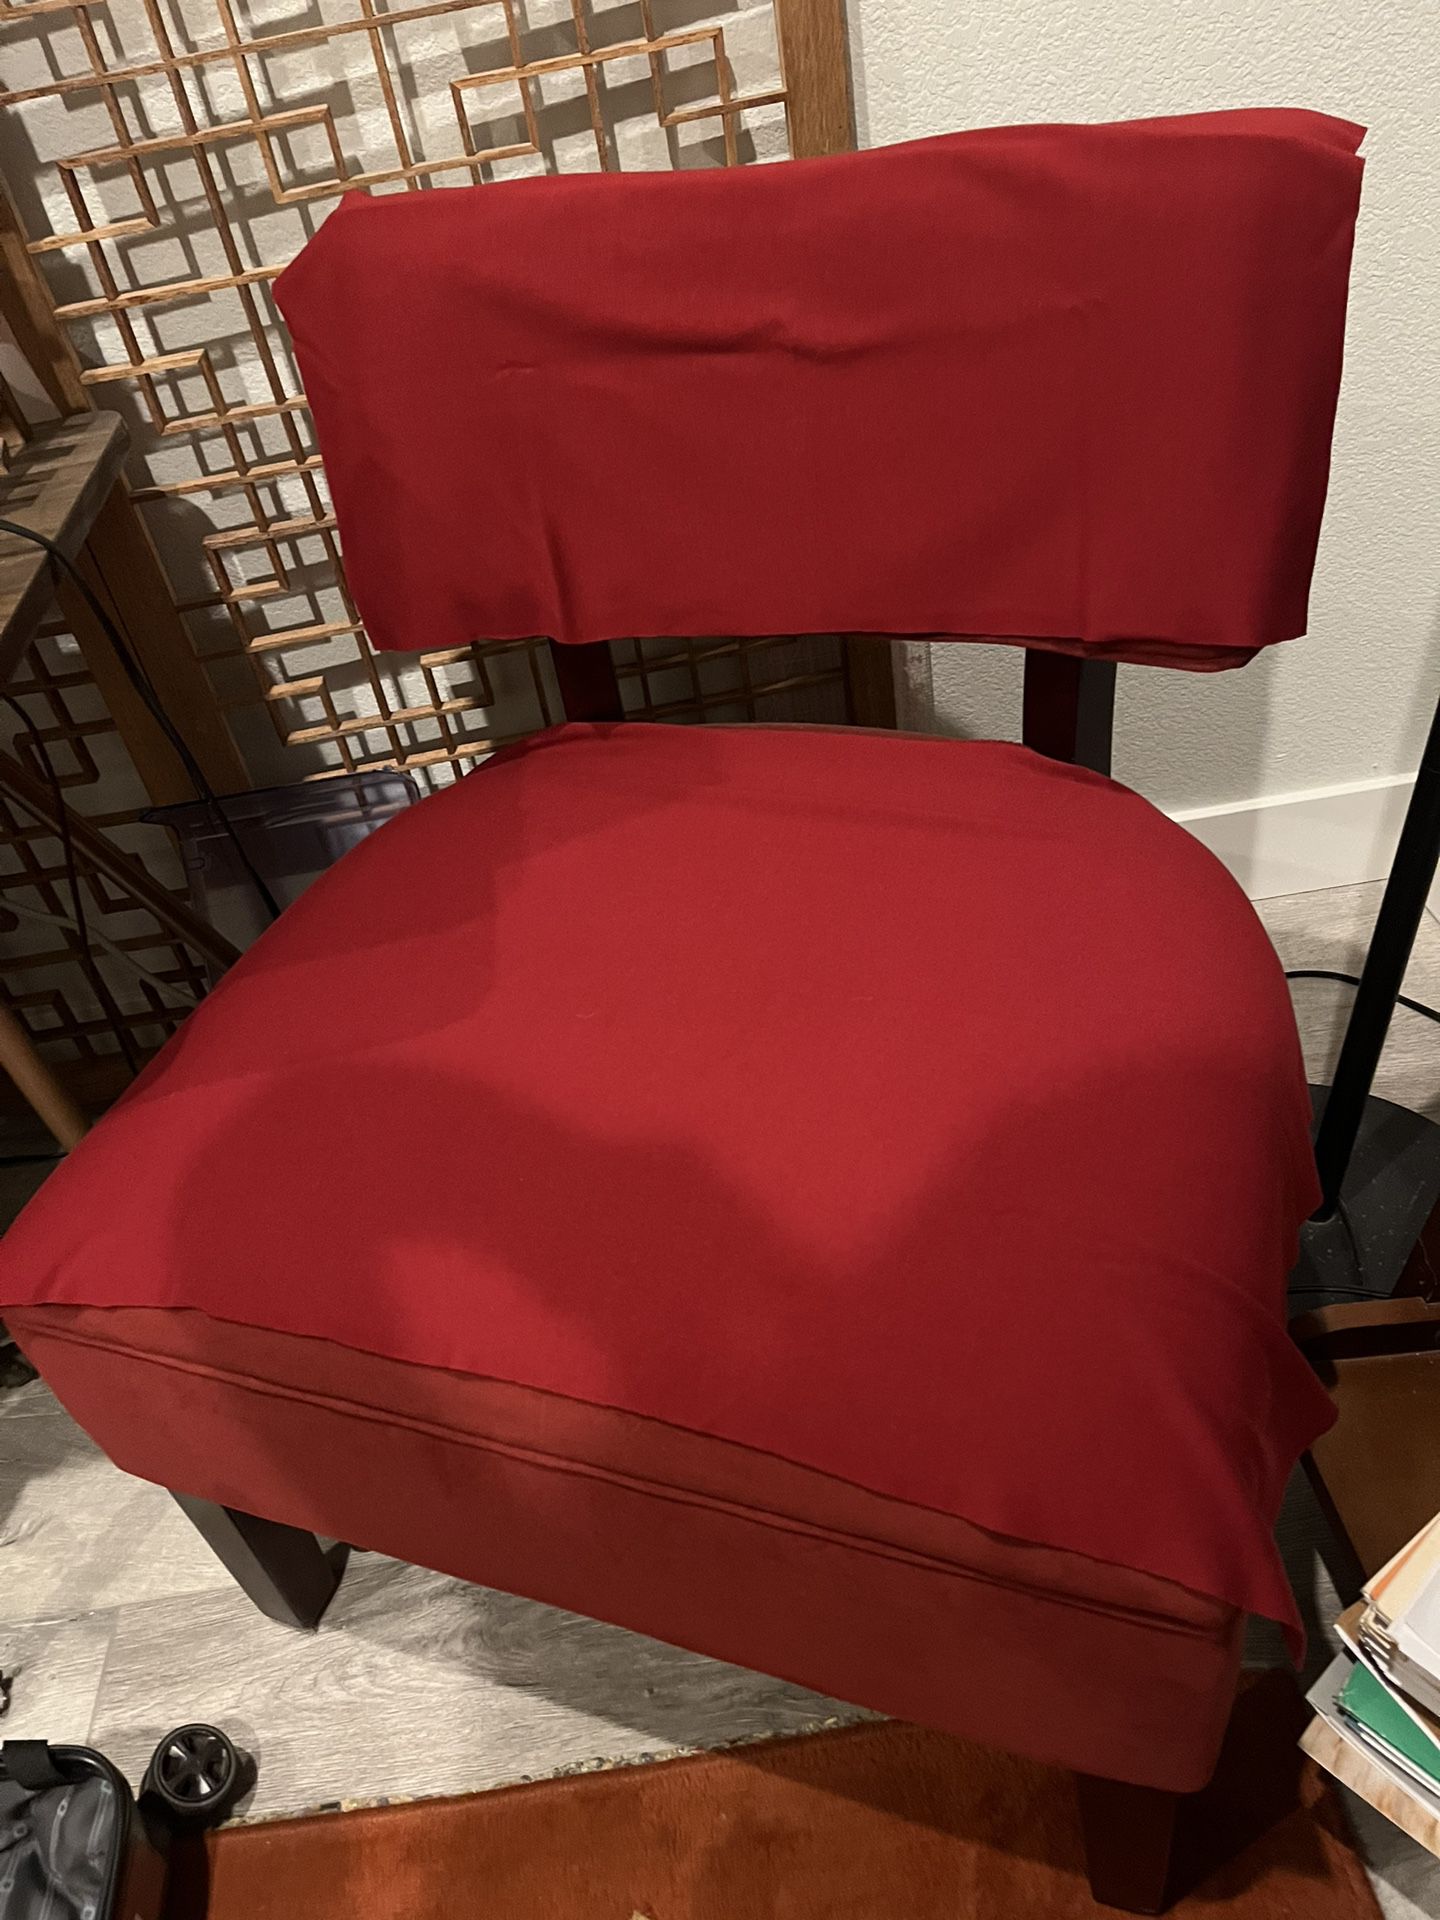 Red Sofa Chair With Cover